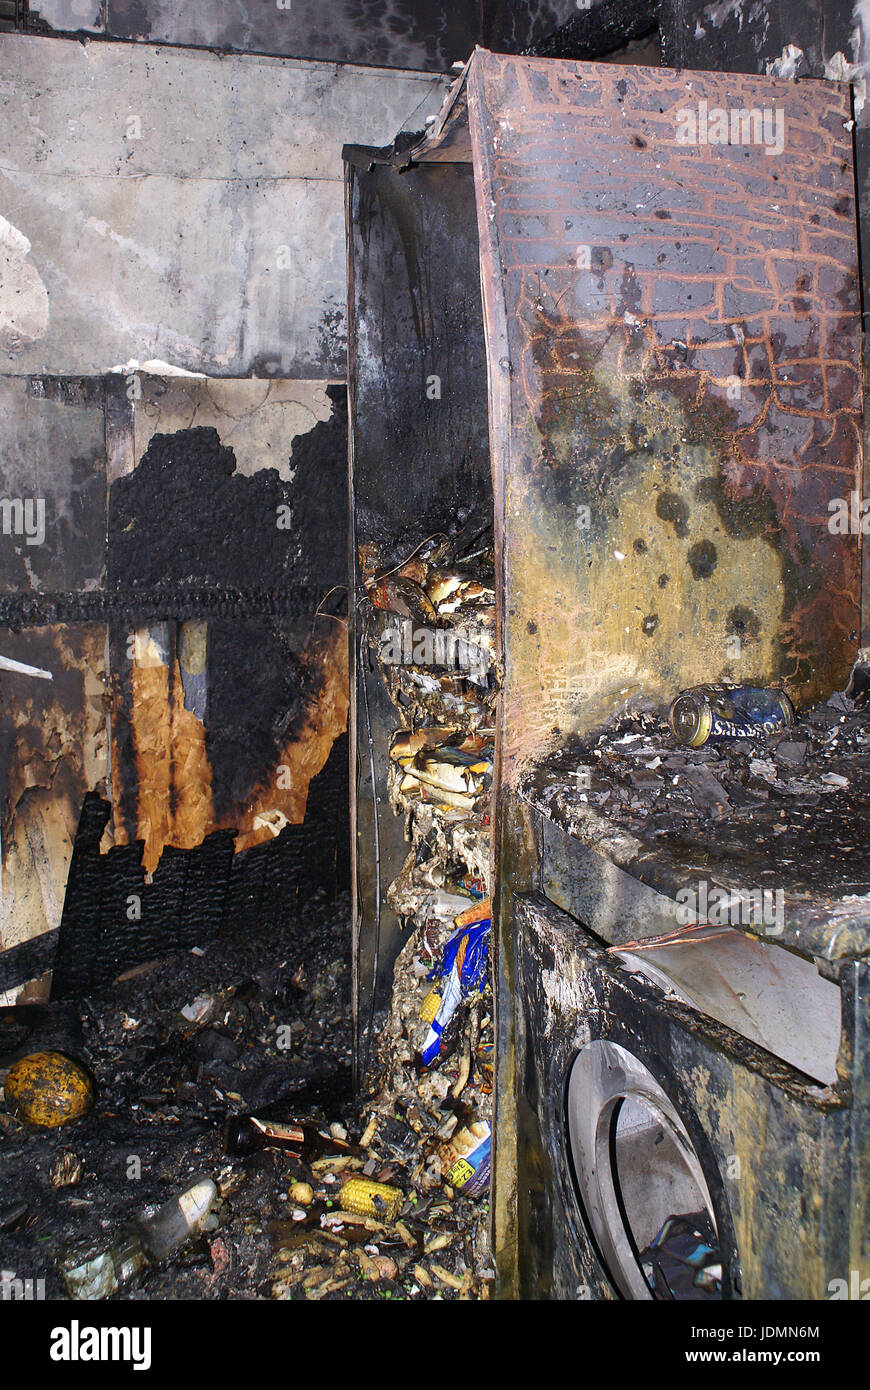 Grenfell Tower fire, London, kitchen fire damage Stock Photo